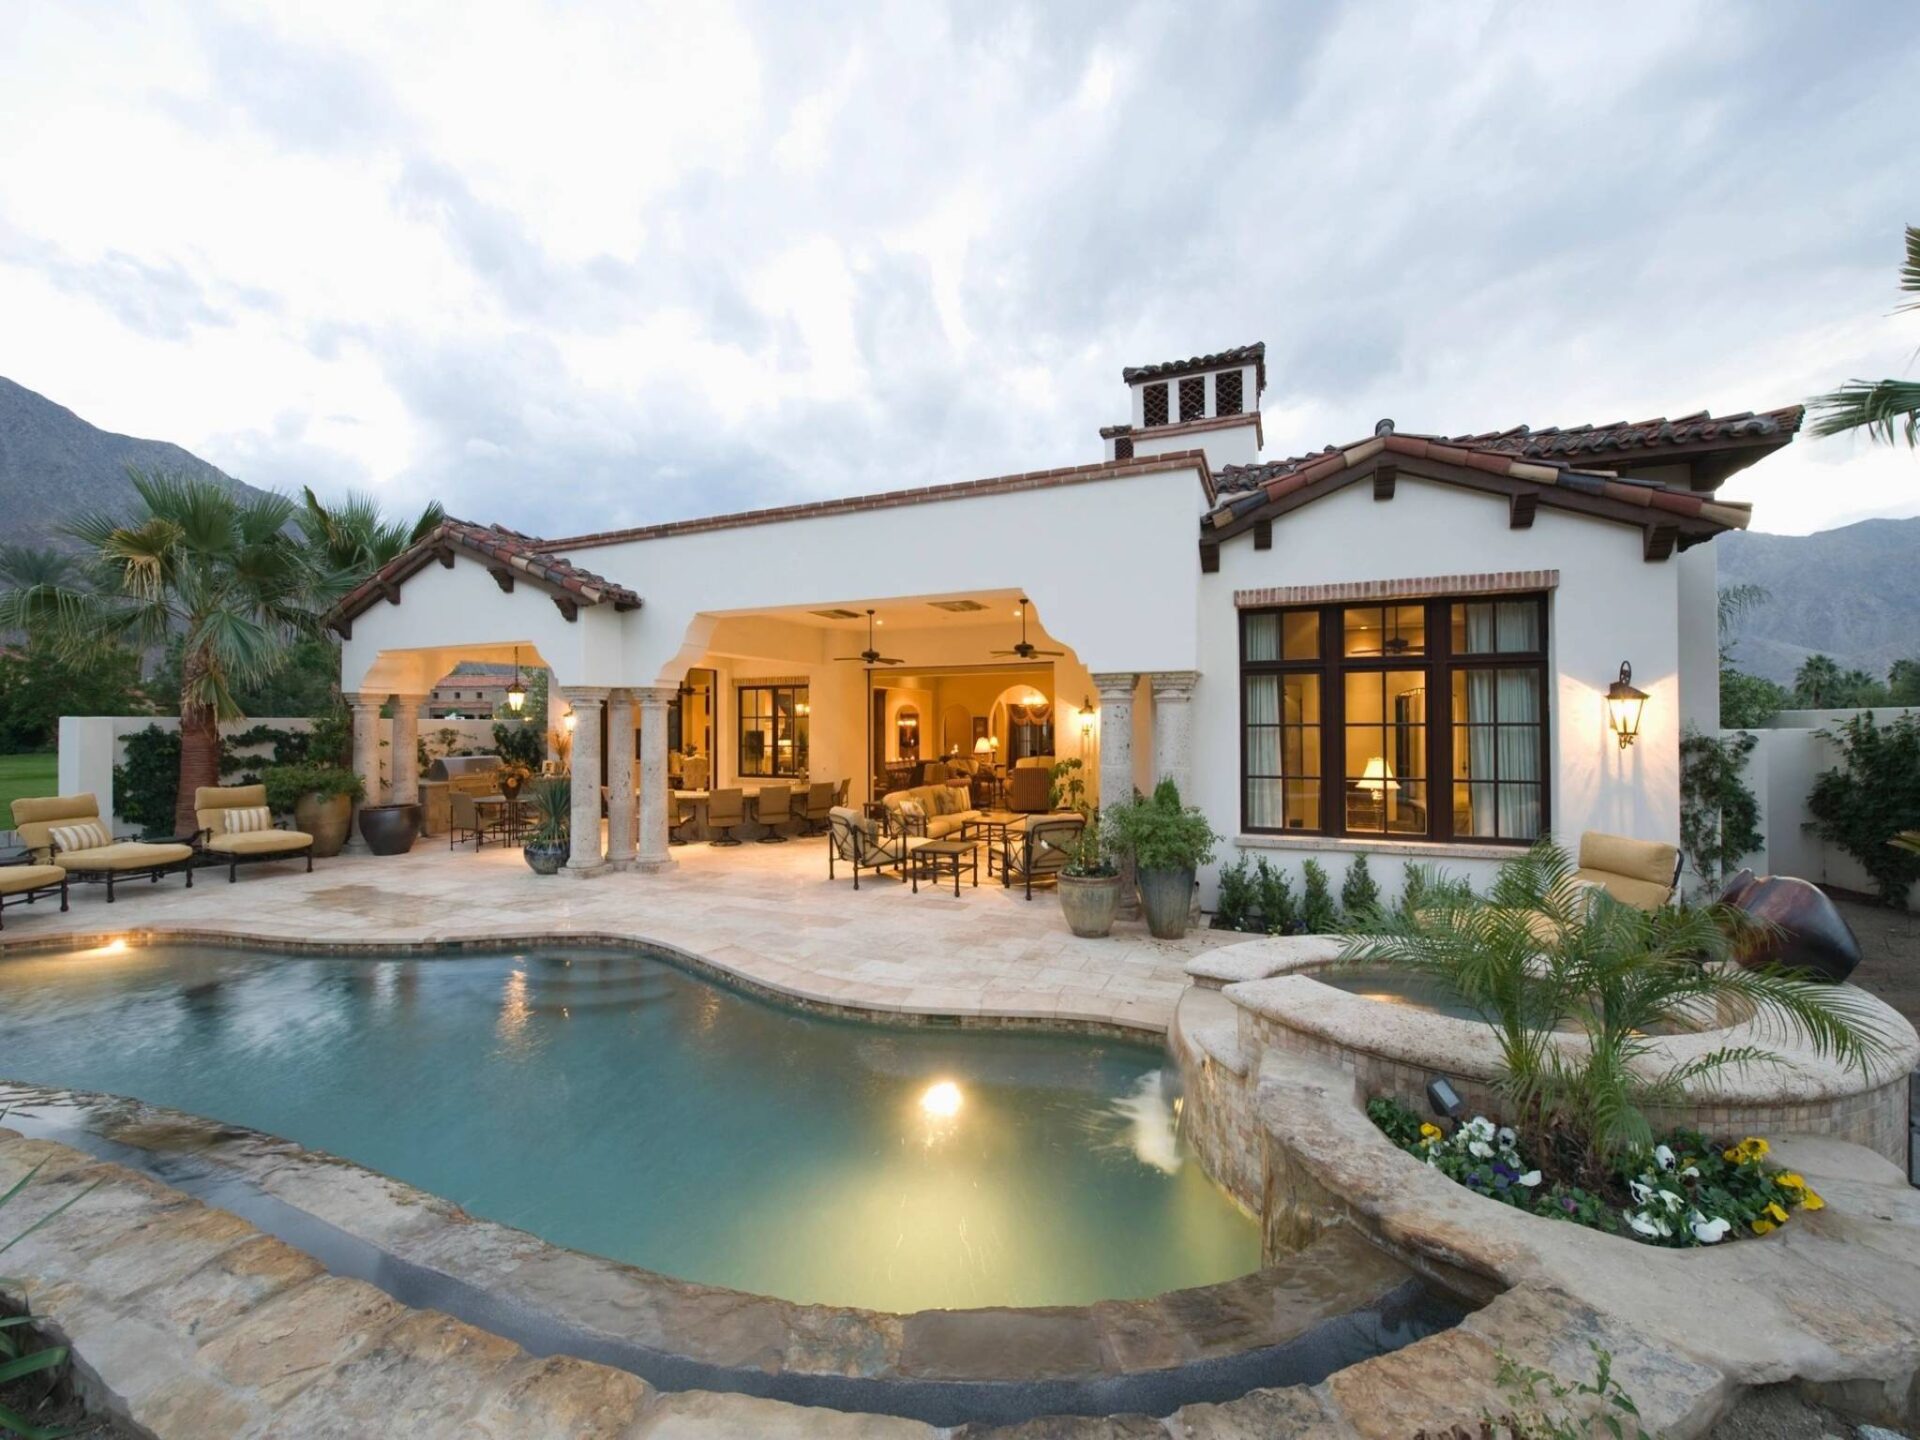 A pool with a patio and outdoor furniture.